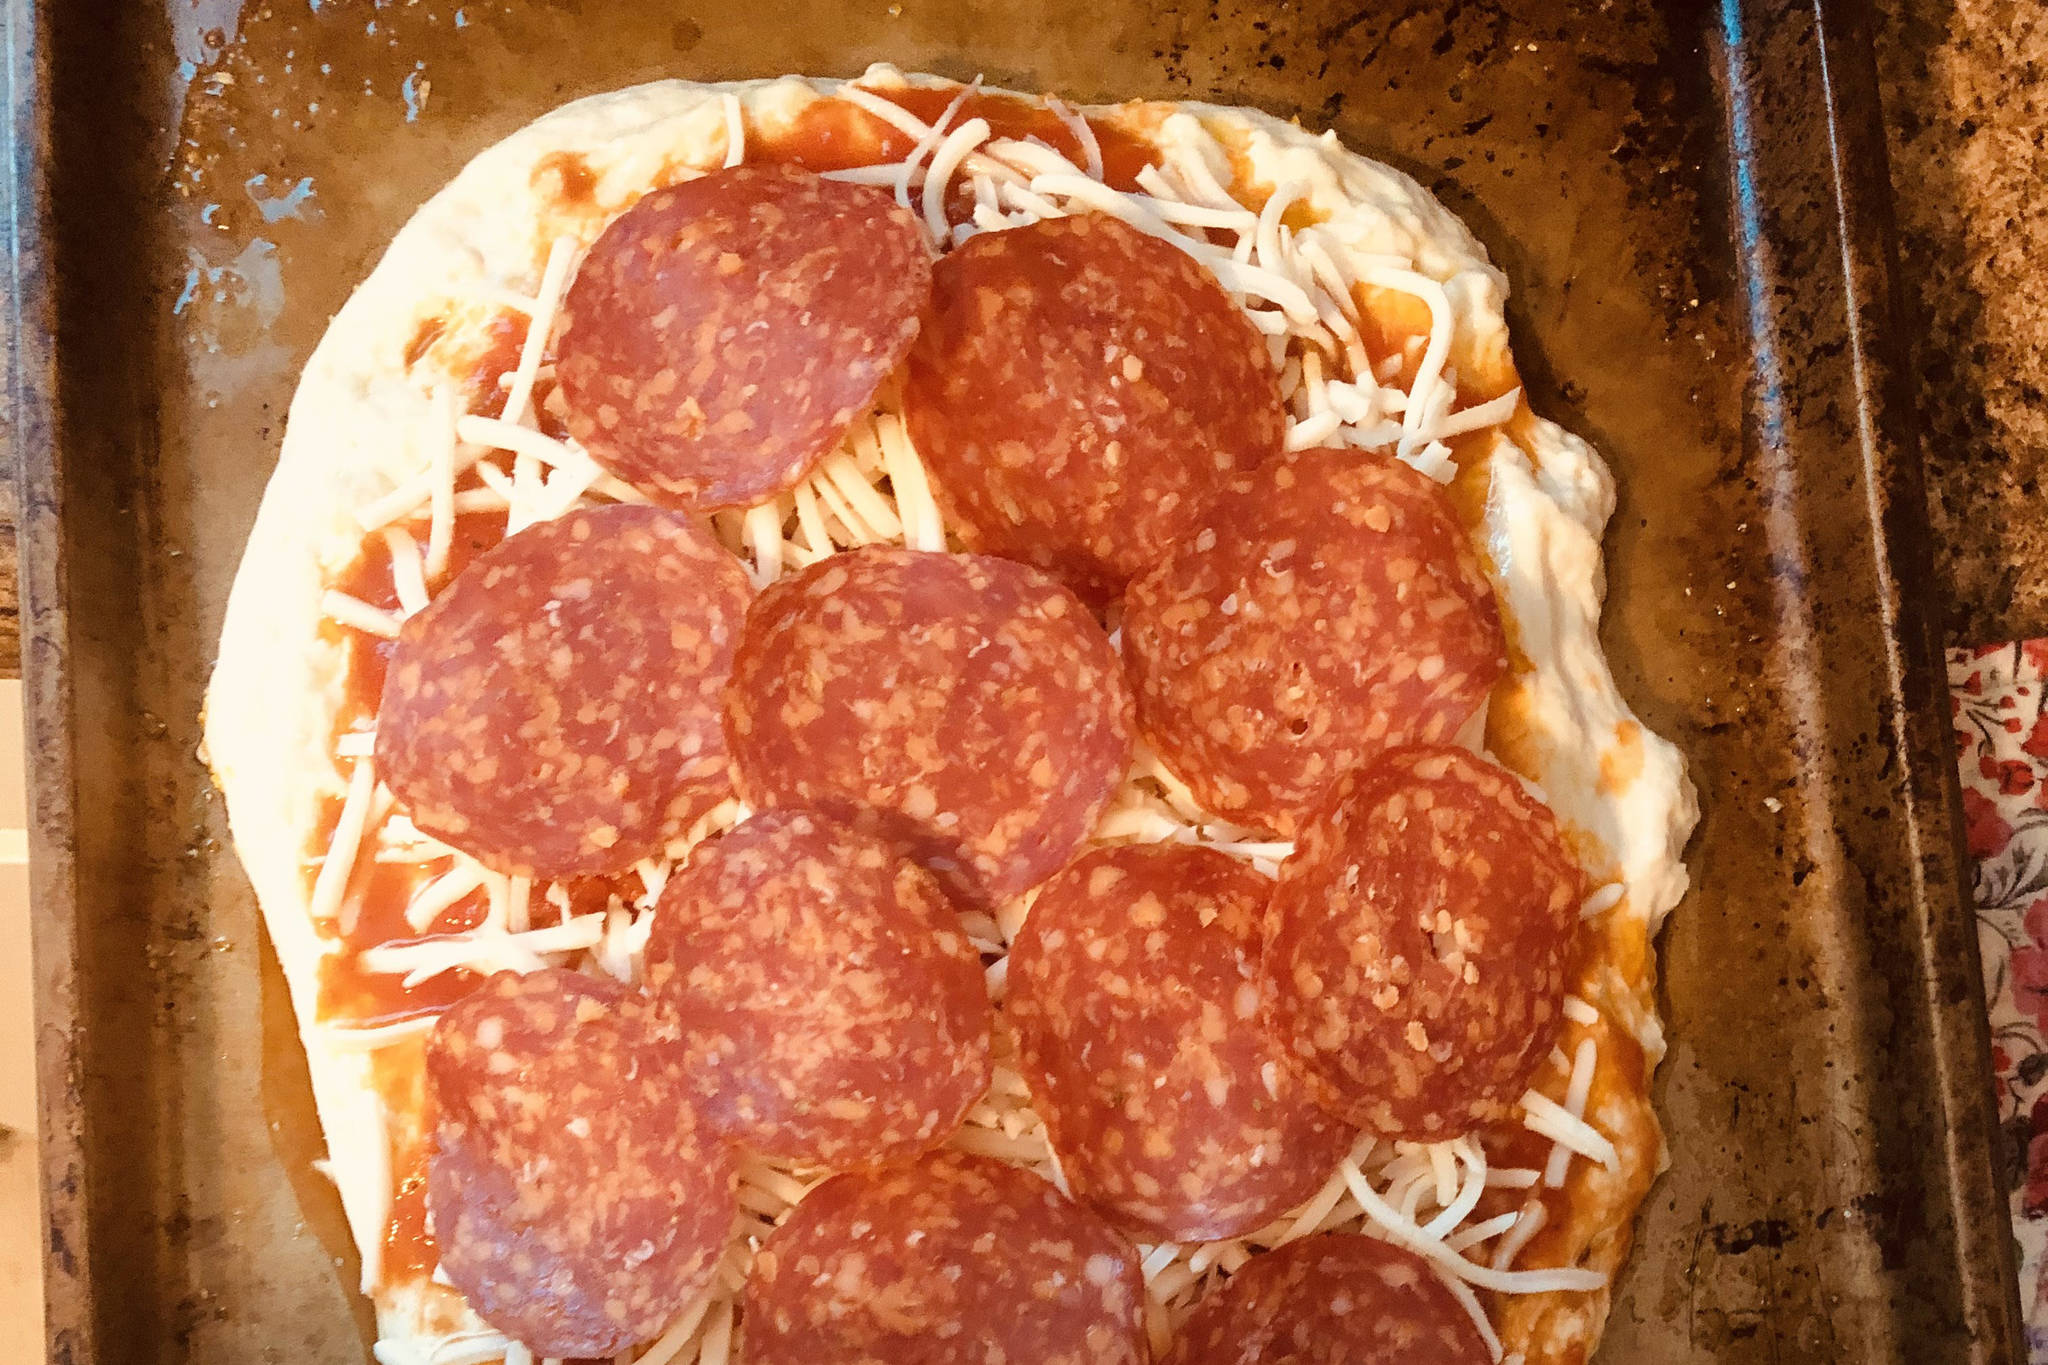 Pepperoni pizza is ready to go into the oven, on Monday, Nov. 2, 2020, in Anchorage, Alaska. (Photo by Victoria Petersen/Peninsula Clarion)